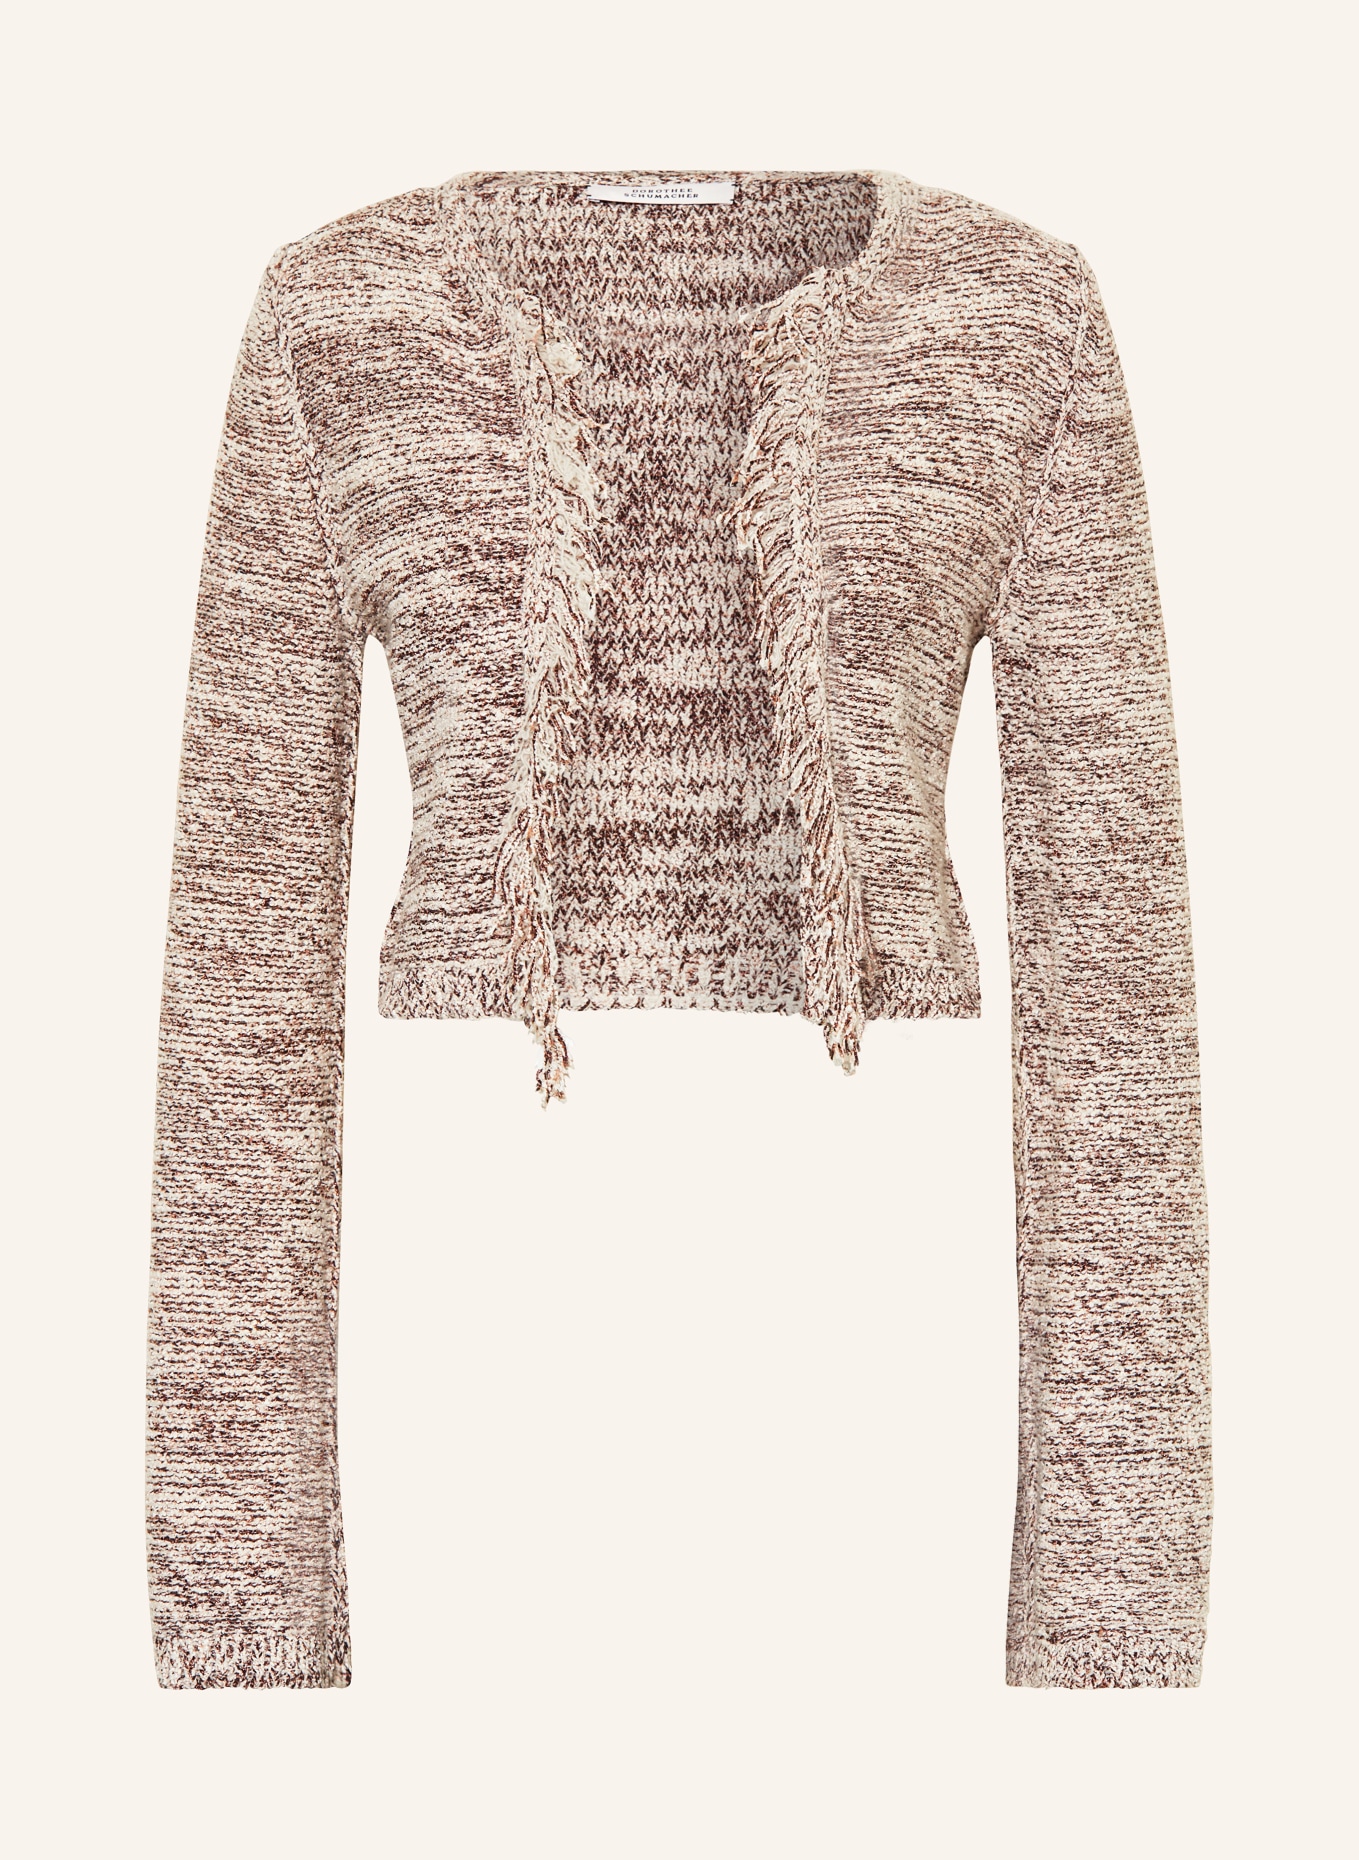 DOROTHEE SCHUMACHER Knit cardigan AUTUMN SPARKLE CARDIGAN with glitter thread, Color: BEIGE/ BROWN (Image 1)